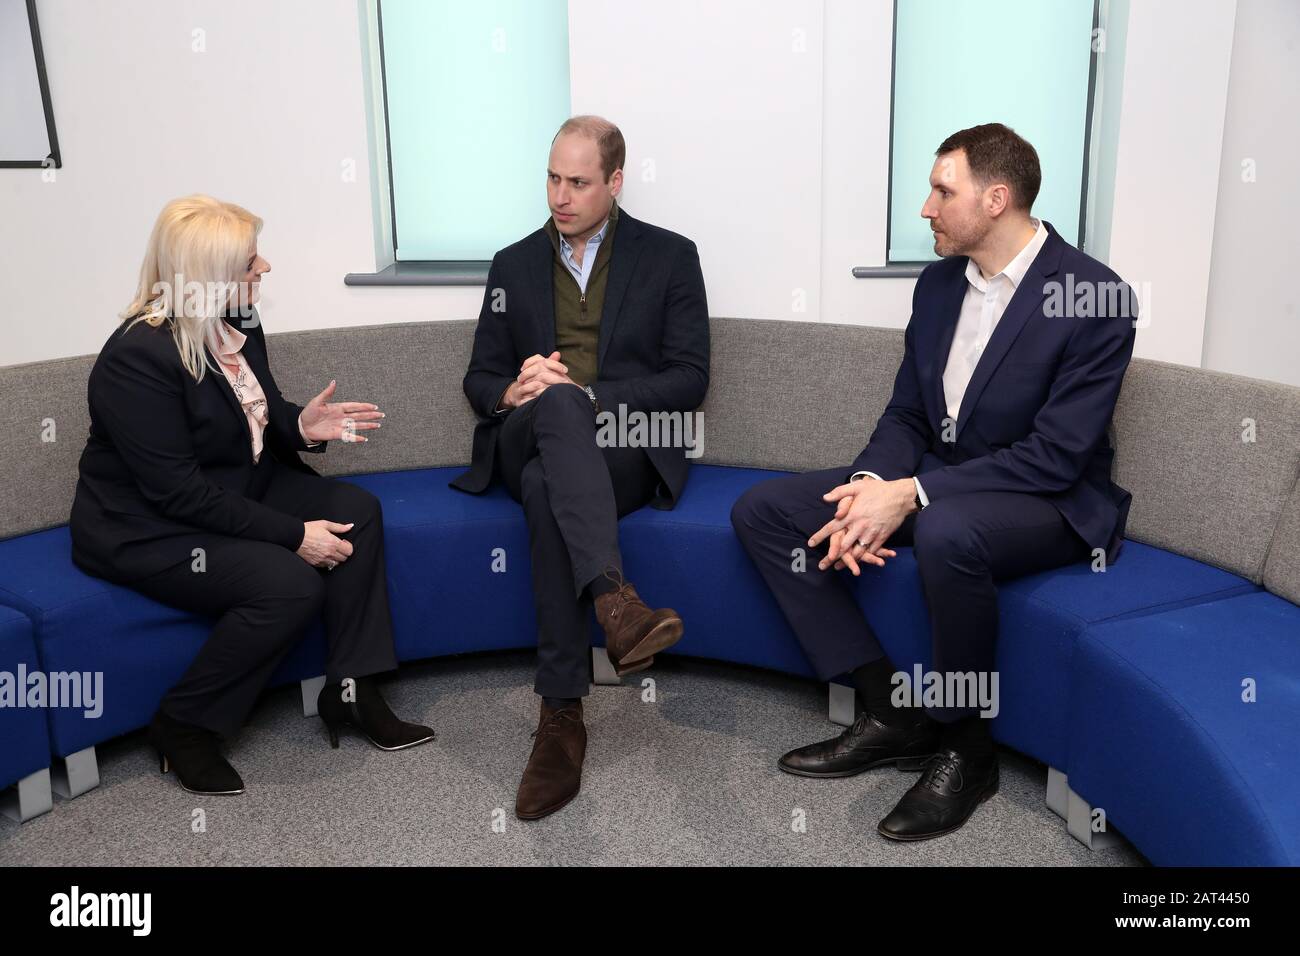 The Duke of Cambridge (centre) talks to Denise Barrett-Baxendale (left), CEO Everton football Club and Michael Salla (right), Director of Health and Sport, Everton football Club, during a visit to Everton in the Community, the official charity of Everton football Club, in Liverpool, as he visits the club's charity to raise awareness of the Heads Up mental health campaign. Stock Photo